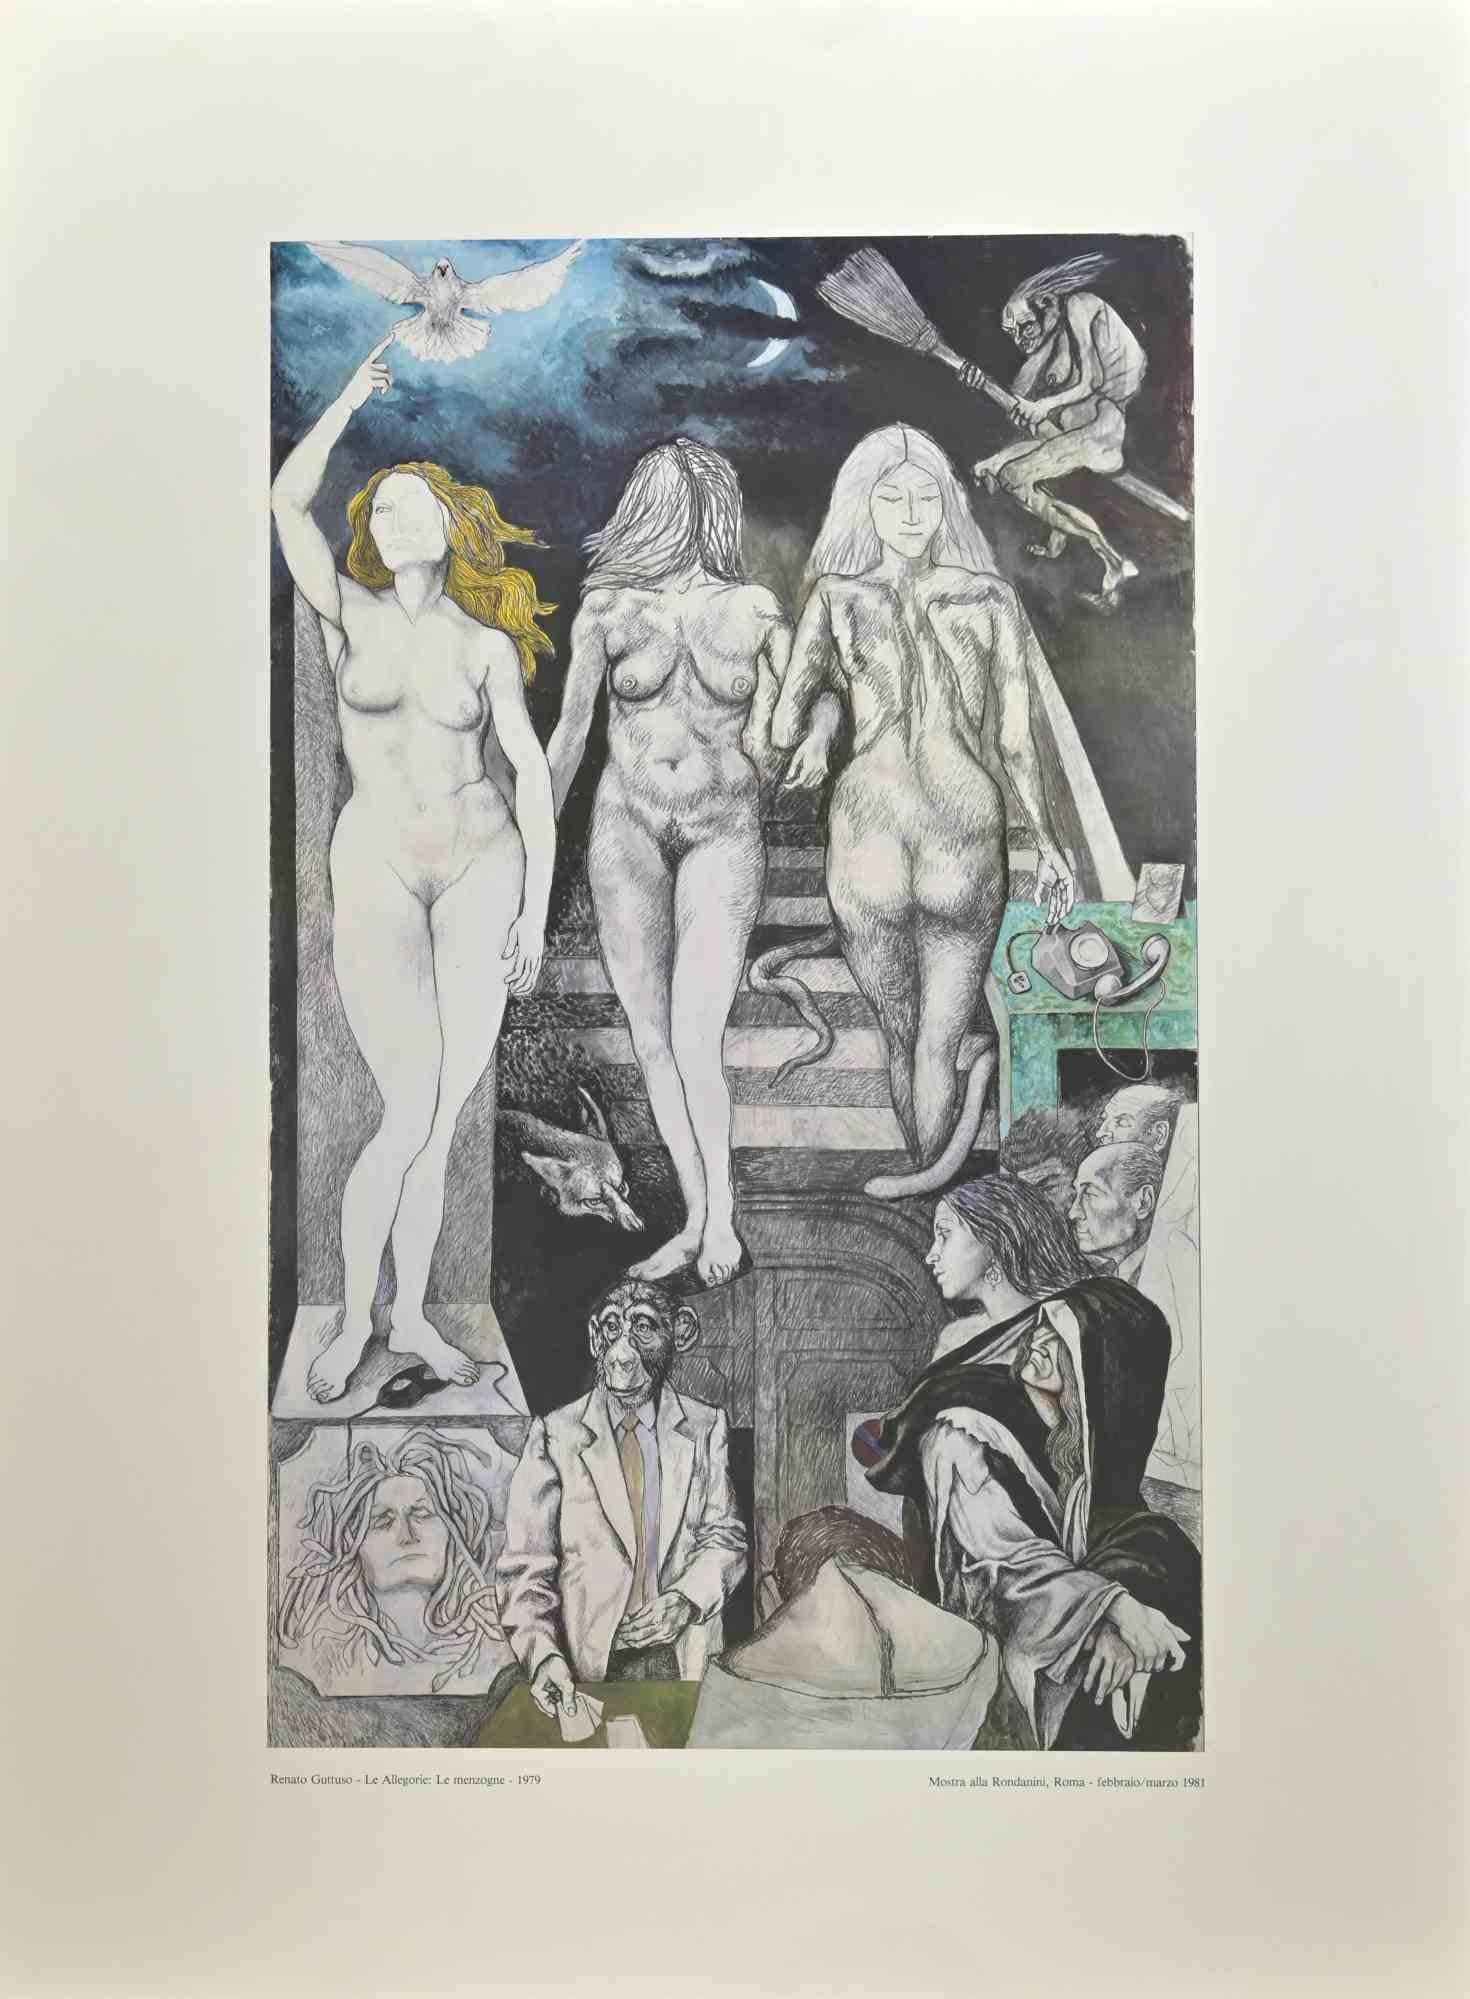 Allegories: Lies is a vintage poster realized after the Italian artist  Renato Guttuso  (Bagheria, 1911 – Rome, 1987) in  1981.

Colored Offset on paper. 

The poster was realized on the occasion of the exhibition realized in 1981 at Galleria